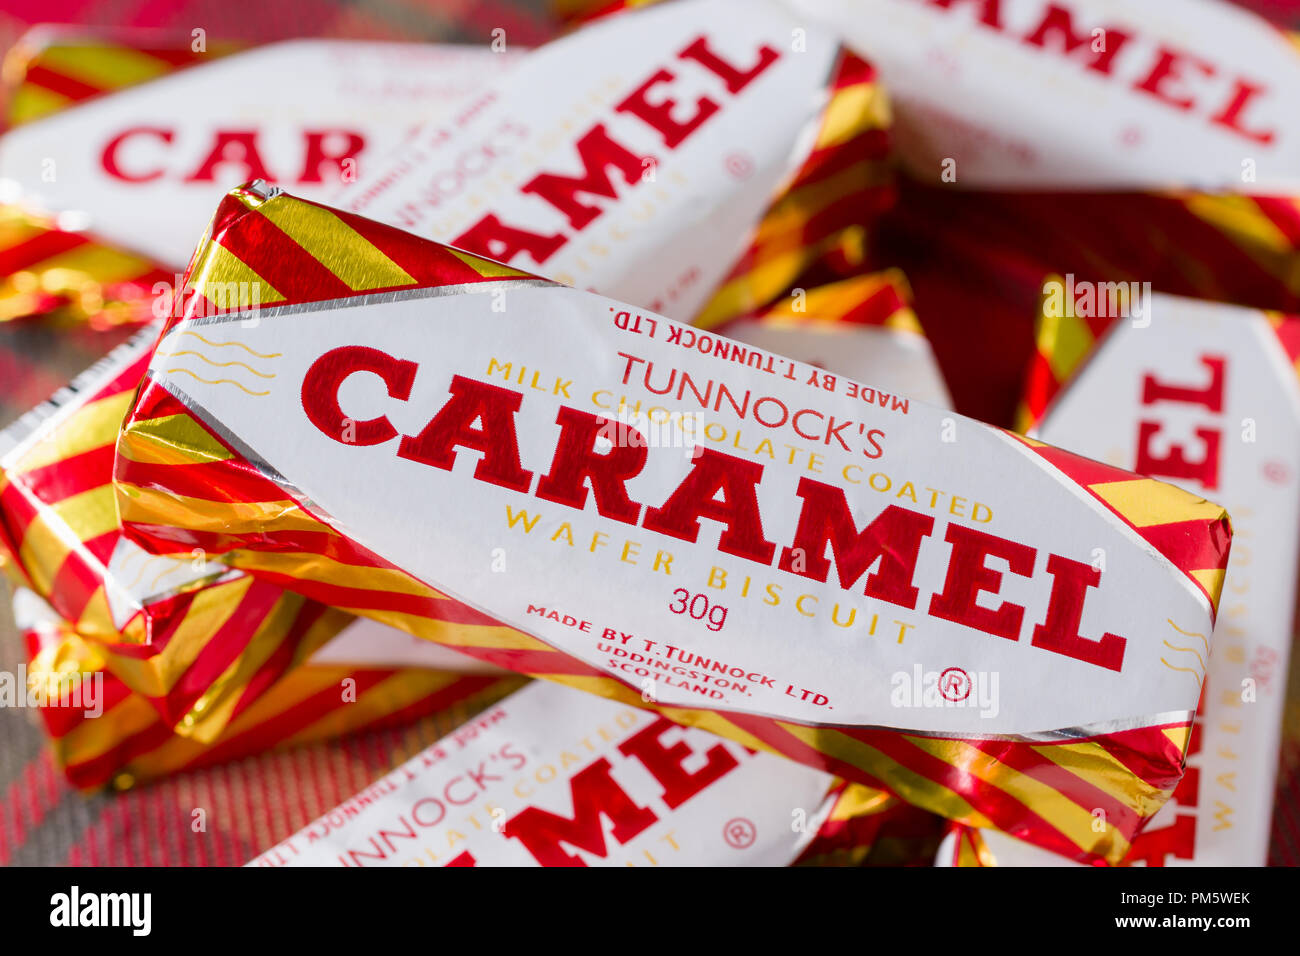 tunnocks-milk-chocolate-caramel-wafers-a-biscuit-produced-by-tunnocks-family-bakers-in-uddingston-scotland-PM5WEK.jpg